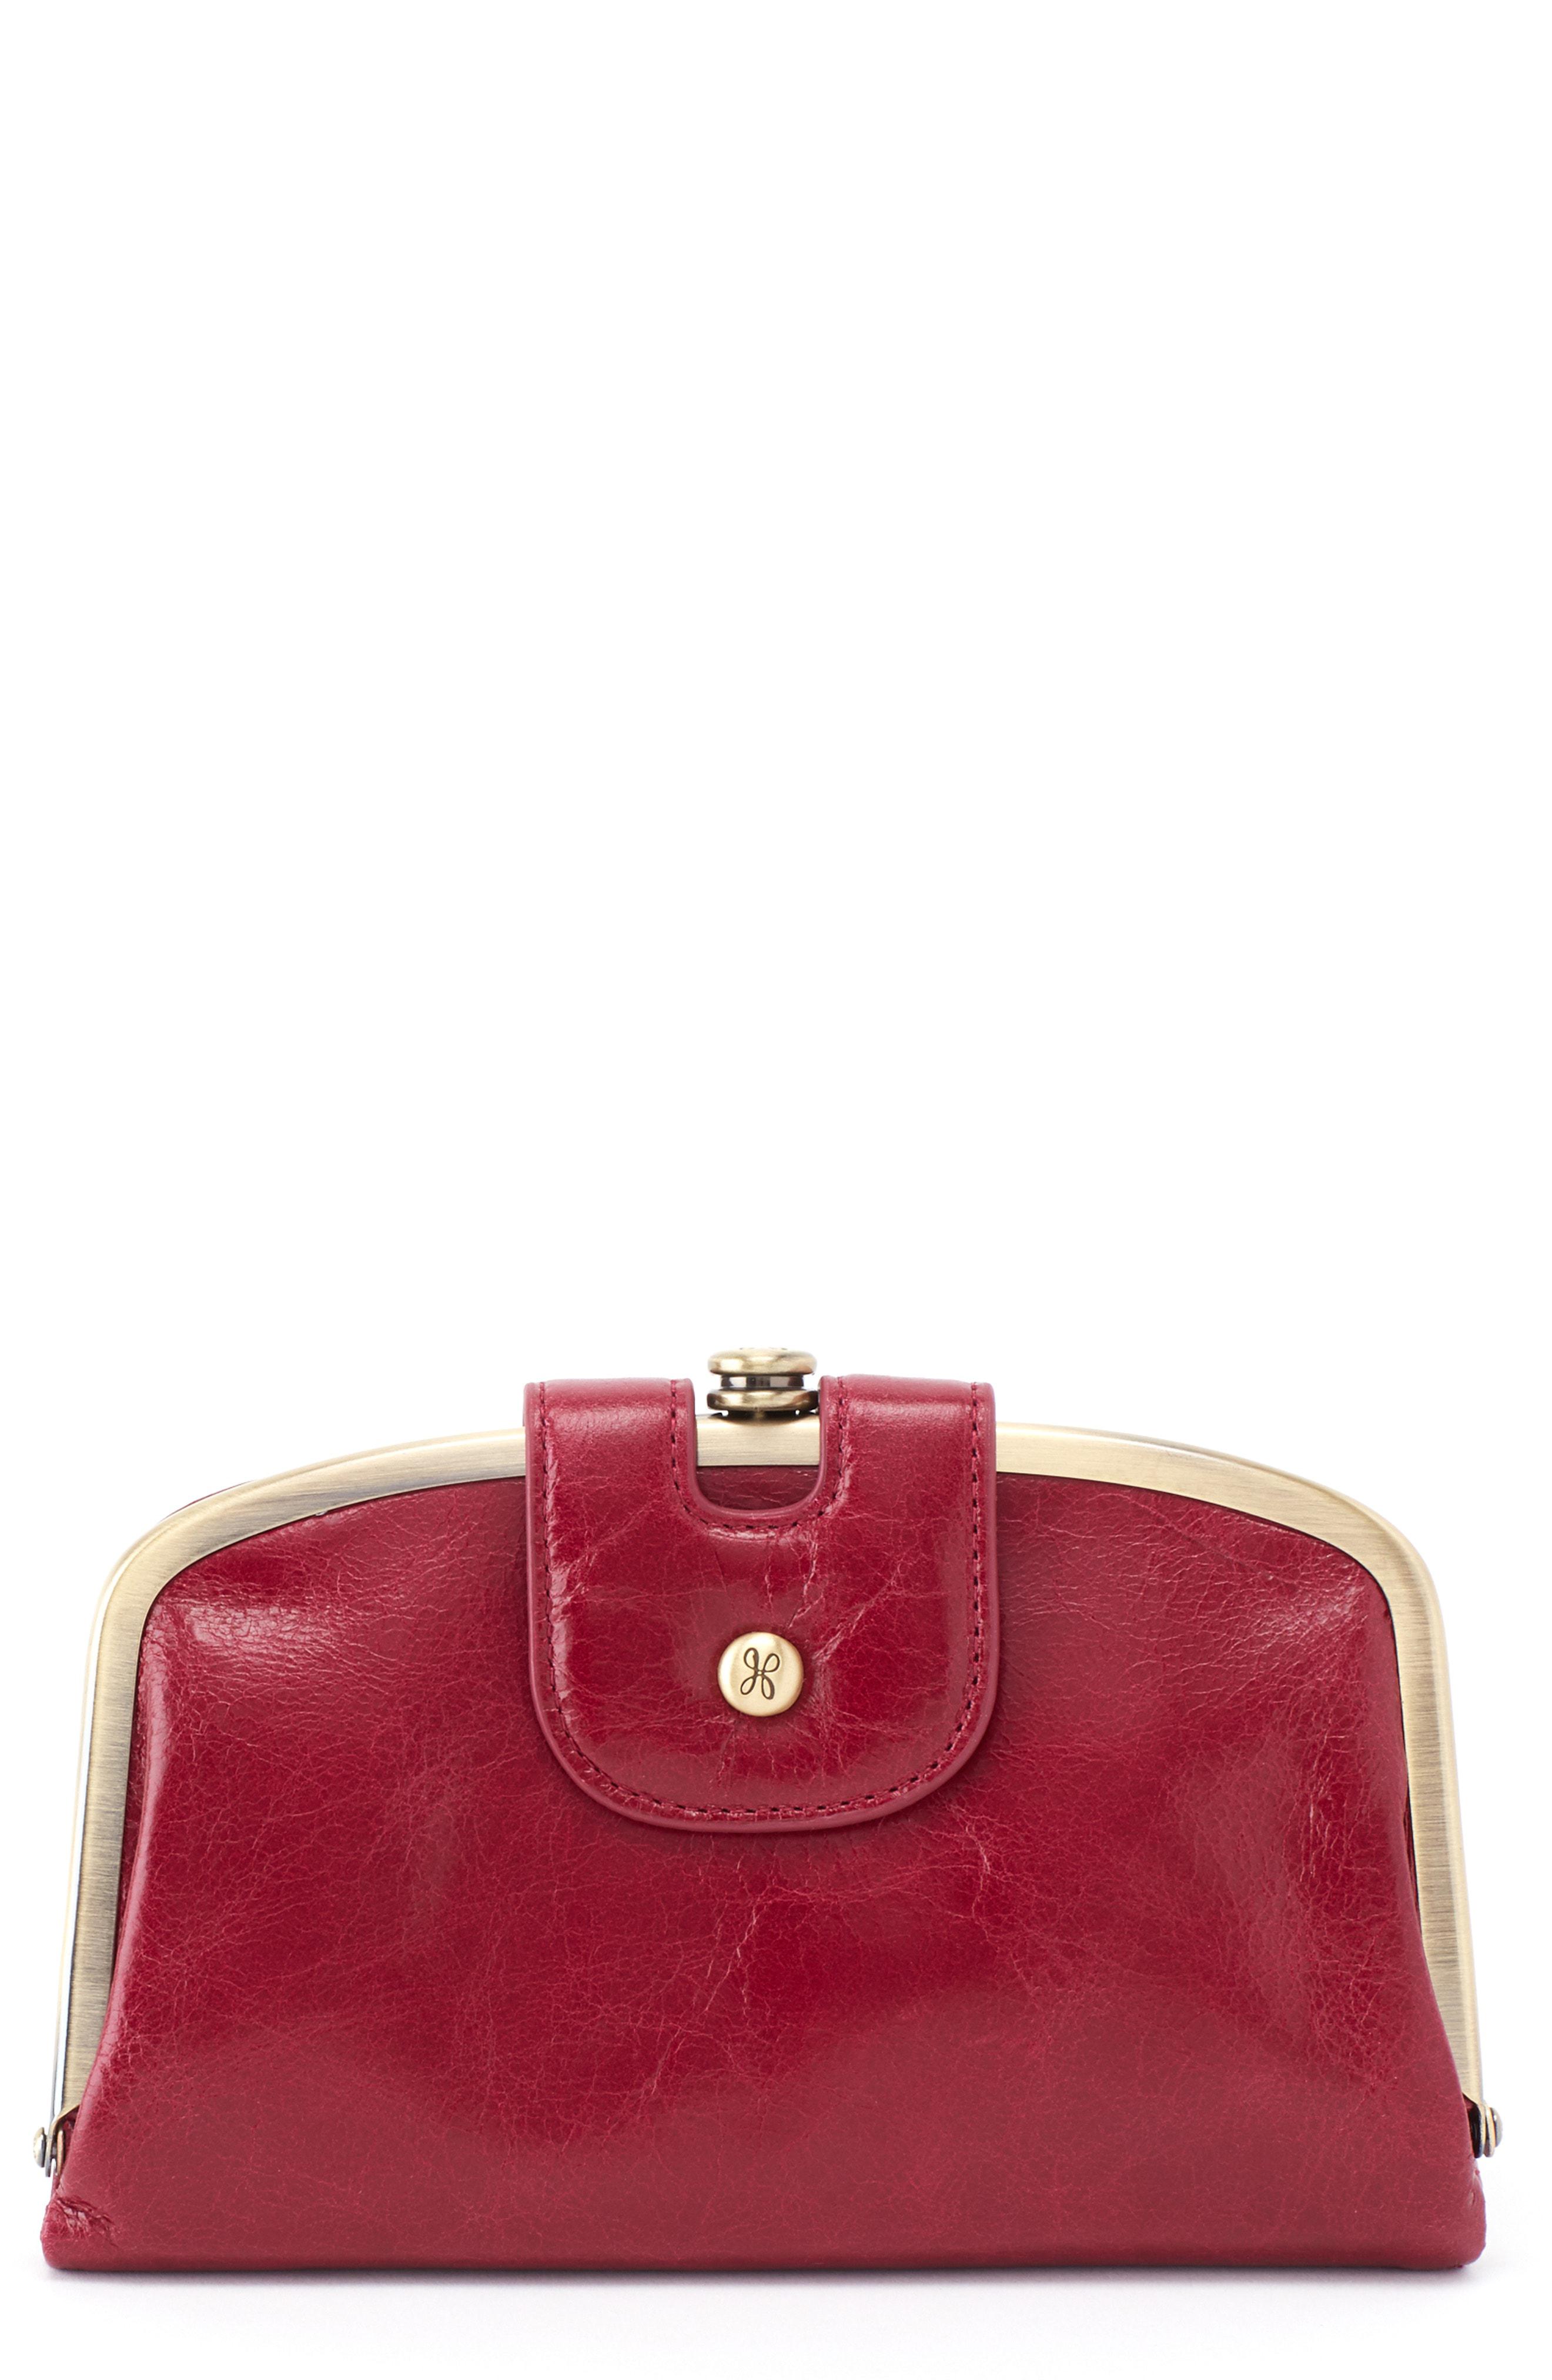 Hobo International Leather Halo Wallet in Ruby (Red) - Lyst